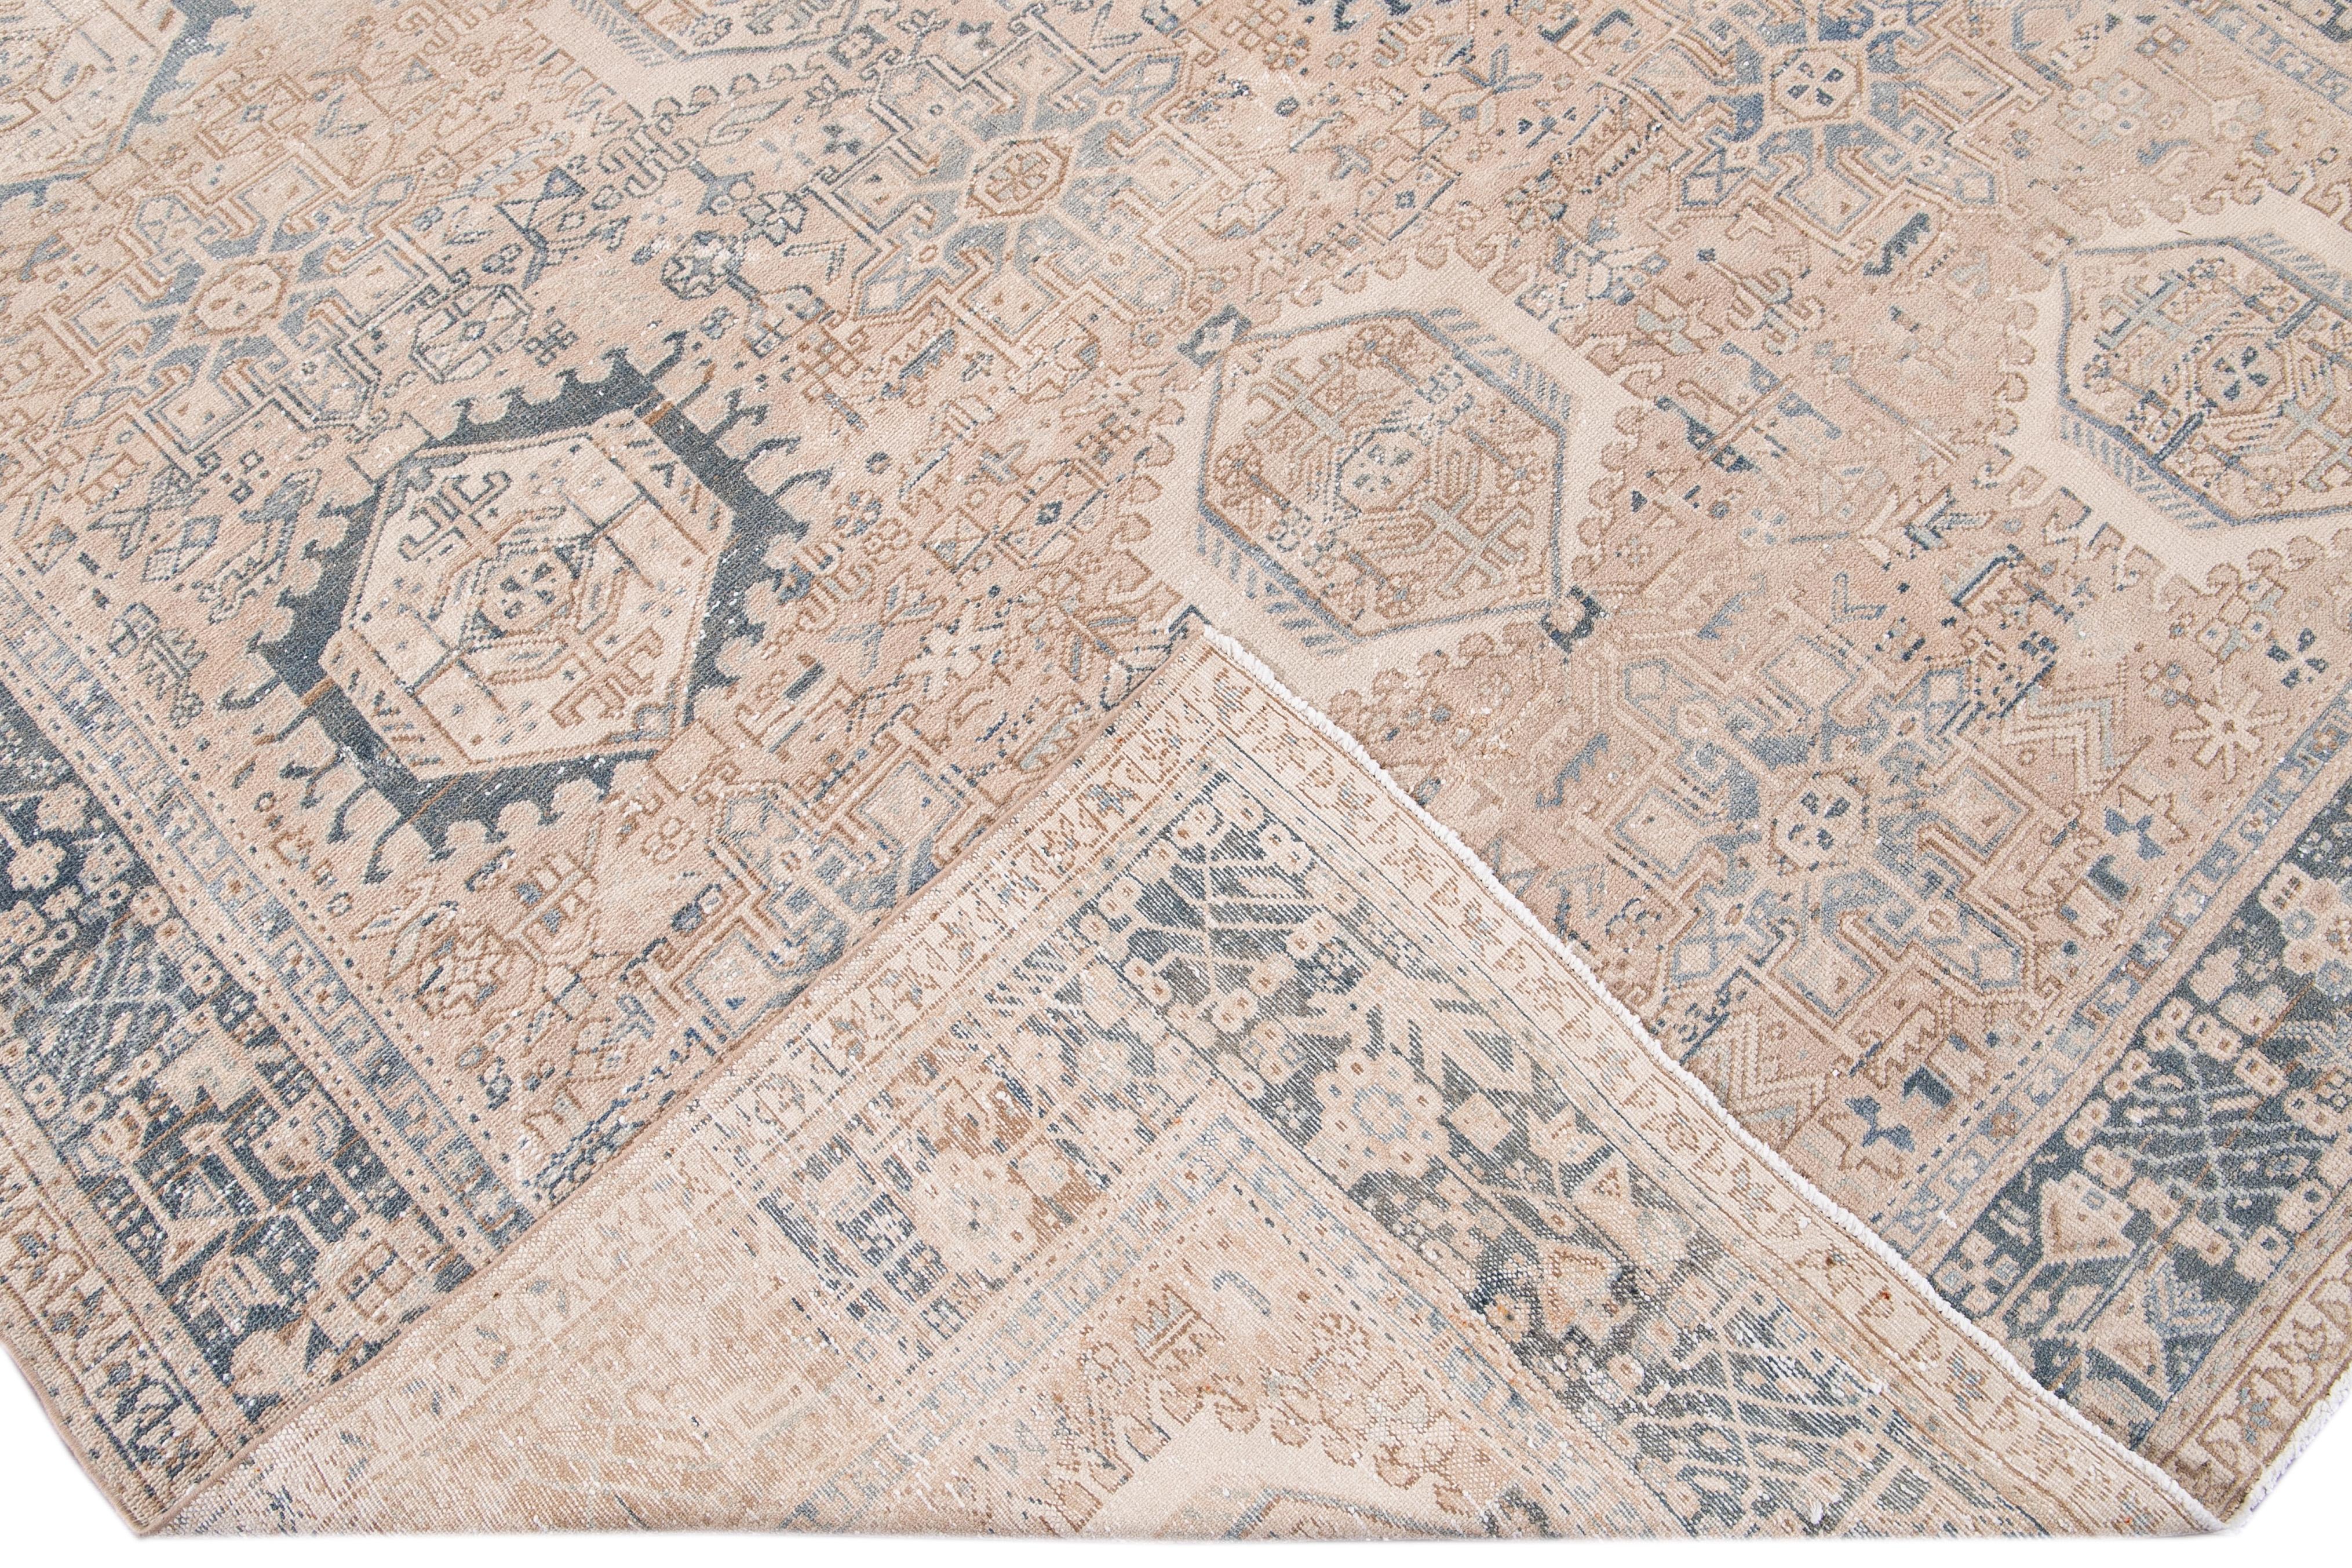 Beautiful antique Persian Heriz hand knotted wool rug with a beige field. This Heriz rug has a blue frame and brown accents in an all-over gorgeous geometric multi-medallion floral design.

This rug measures: 7'10